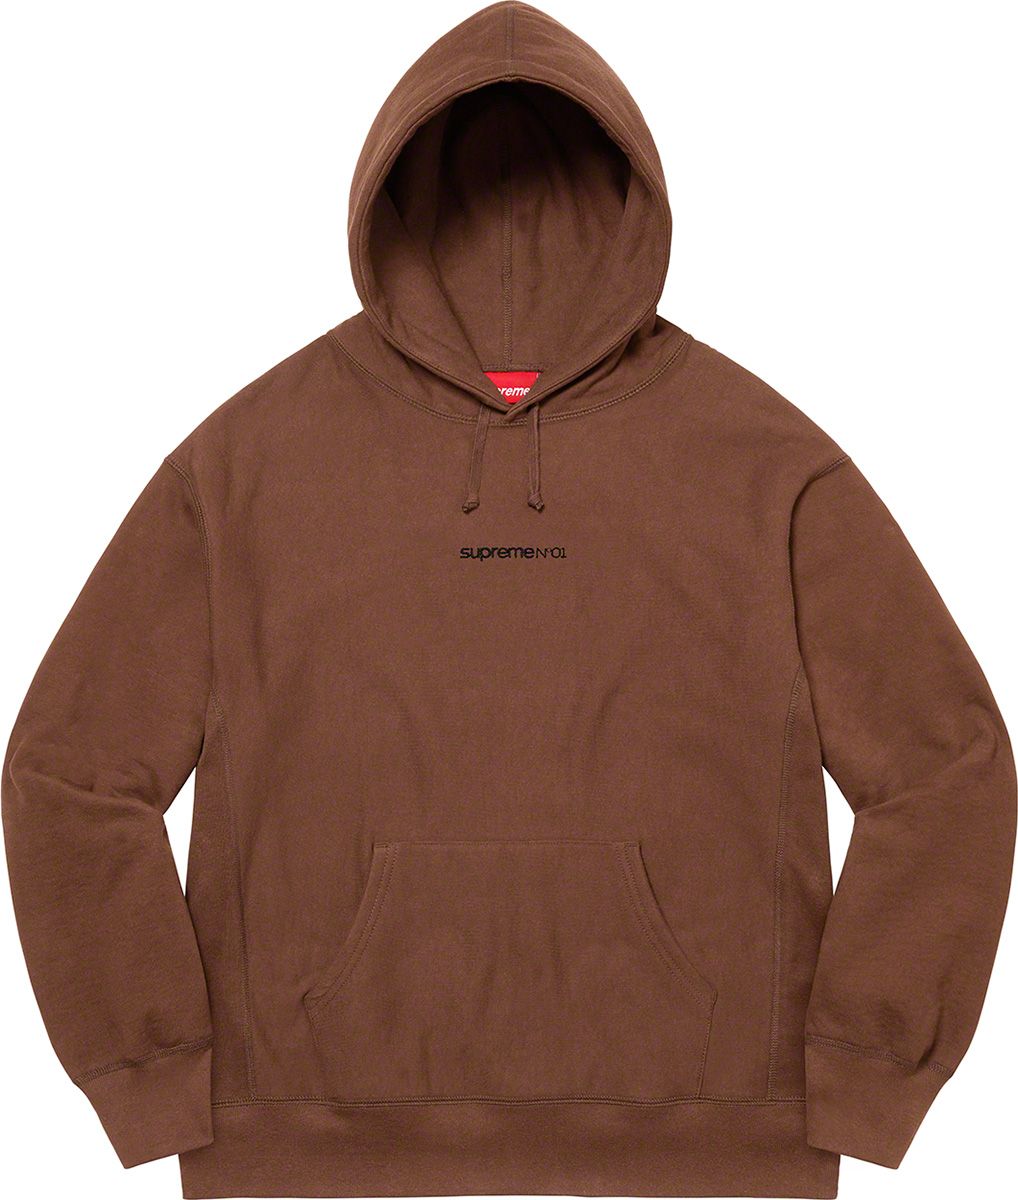 Raised Embroidery Hooded Sweatshirt - Fall/Winter 2021 Preview